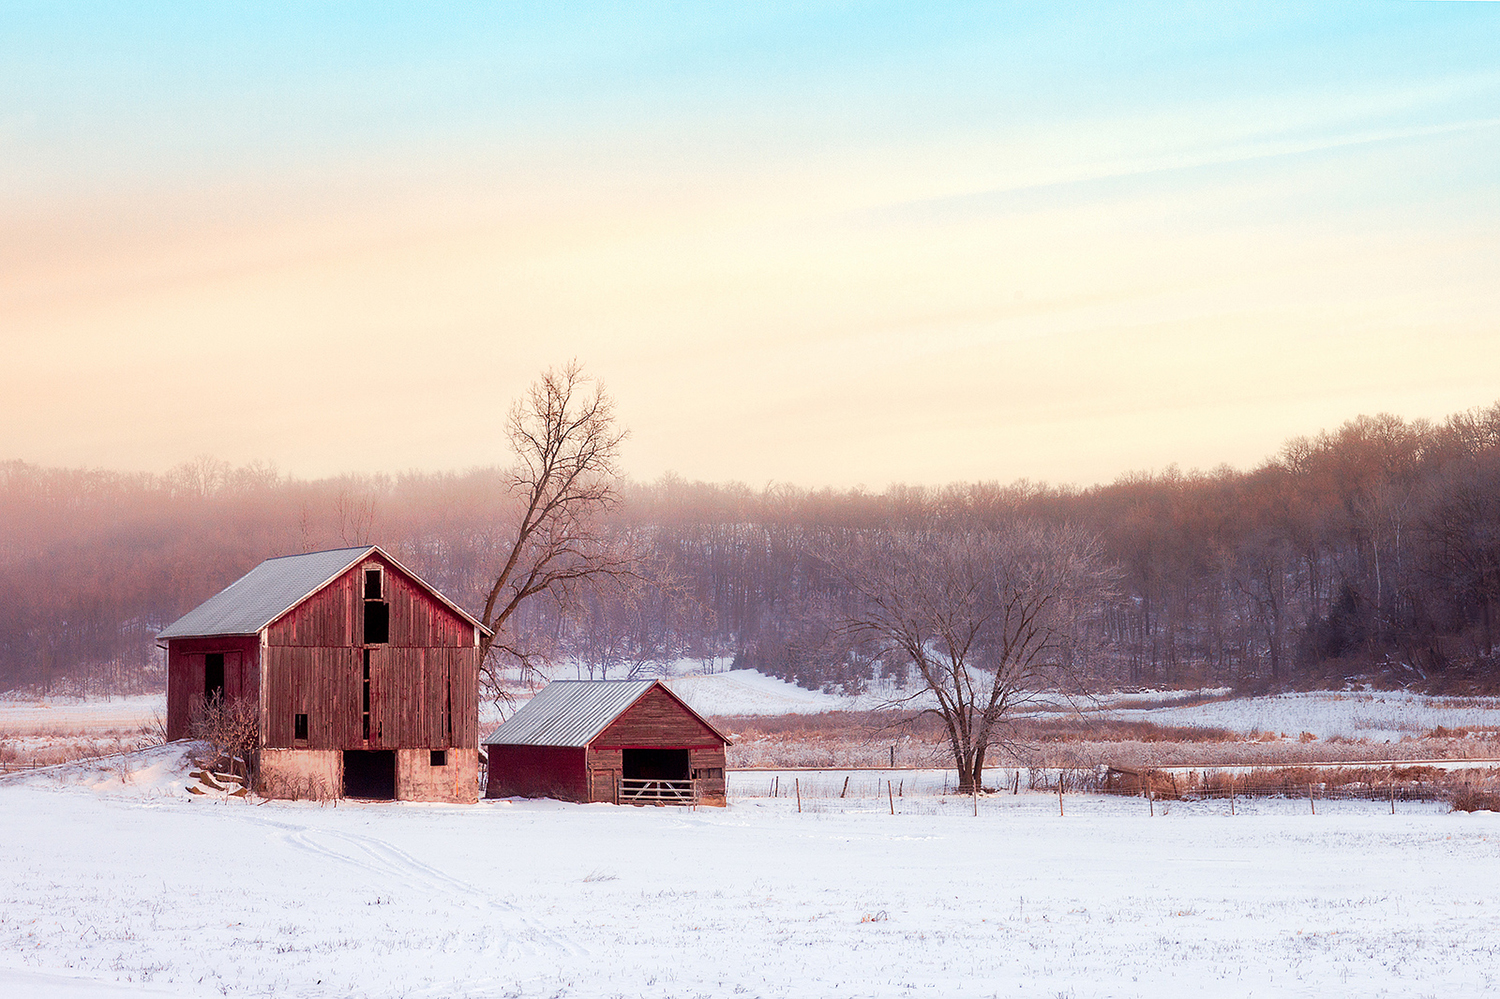 An old barn and shed grace this early morning, snowy, rural scene somewhere outside of Mount Horeb, Wisconsin.&nbsp;→ Buy This Print